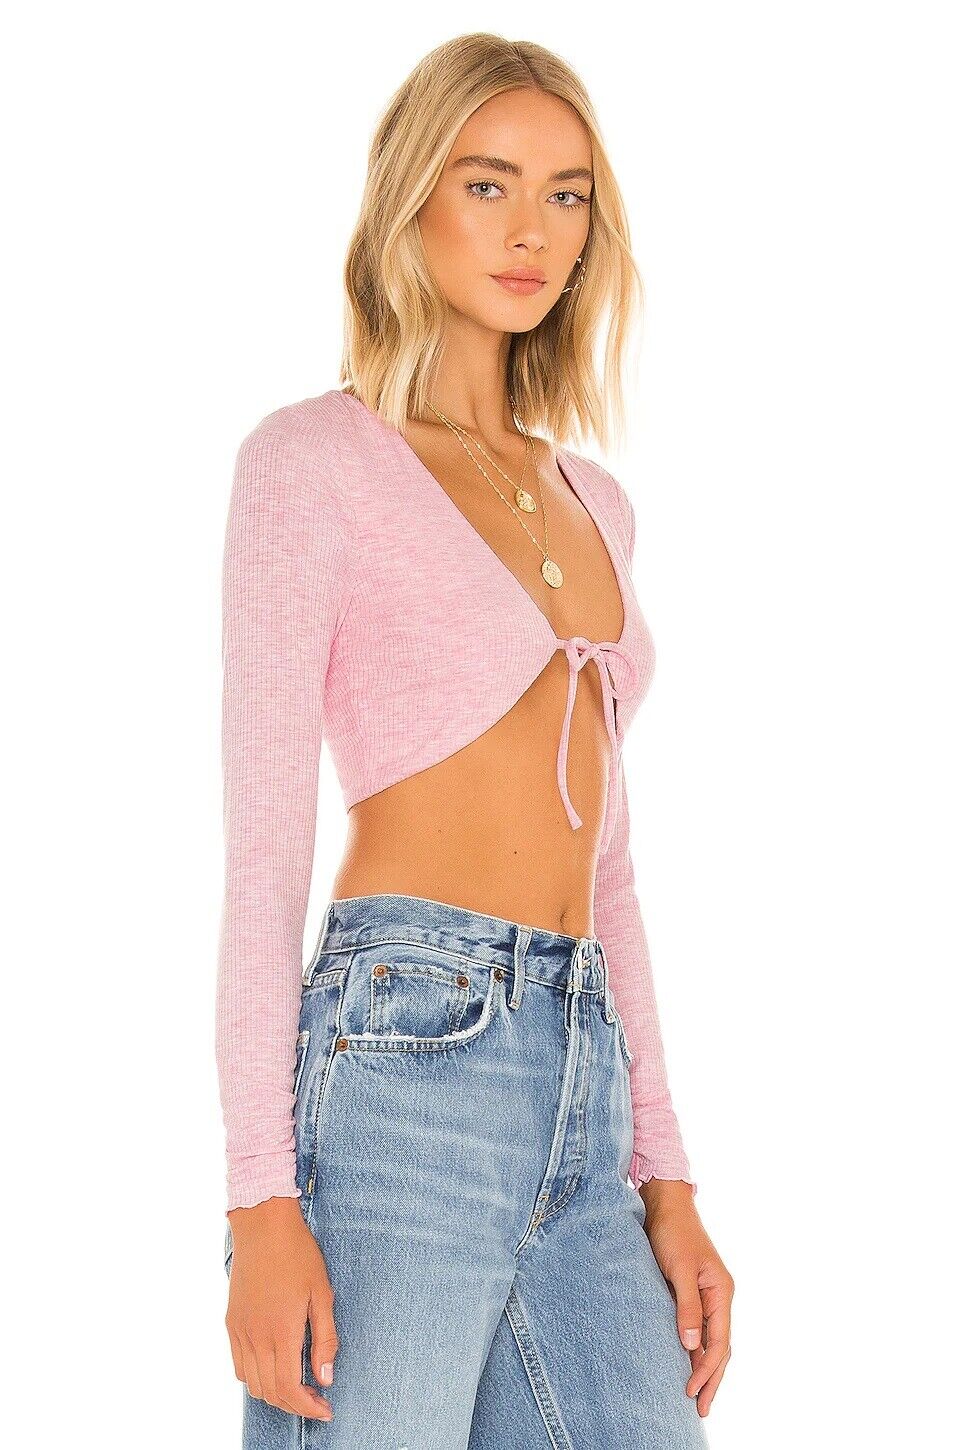 Lovers and Friends Edge Cropped Cardigan in Heathered Pink - size XS